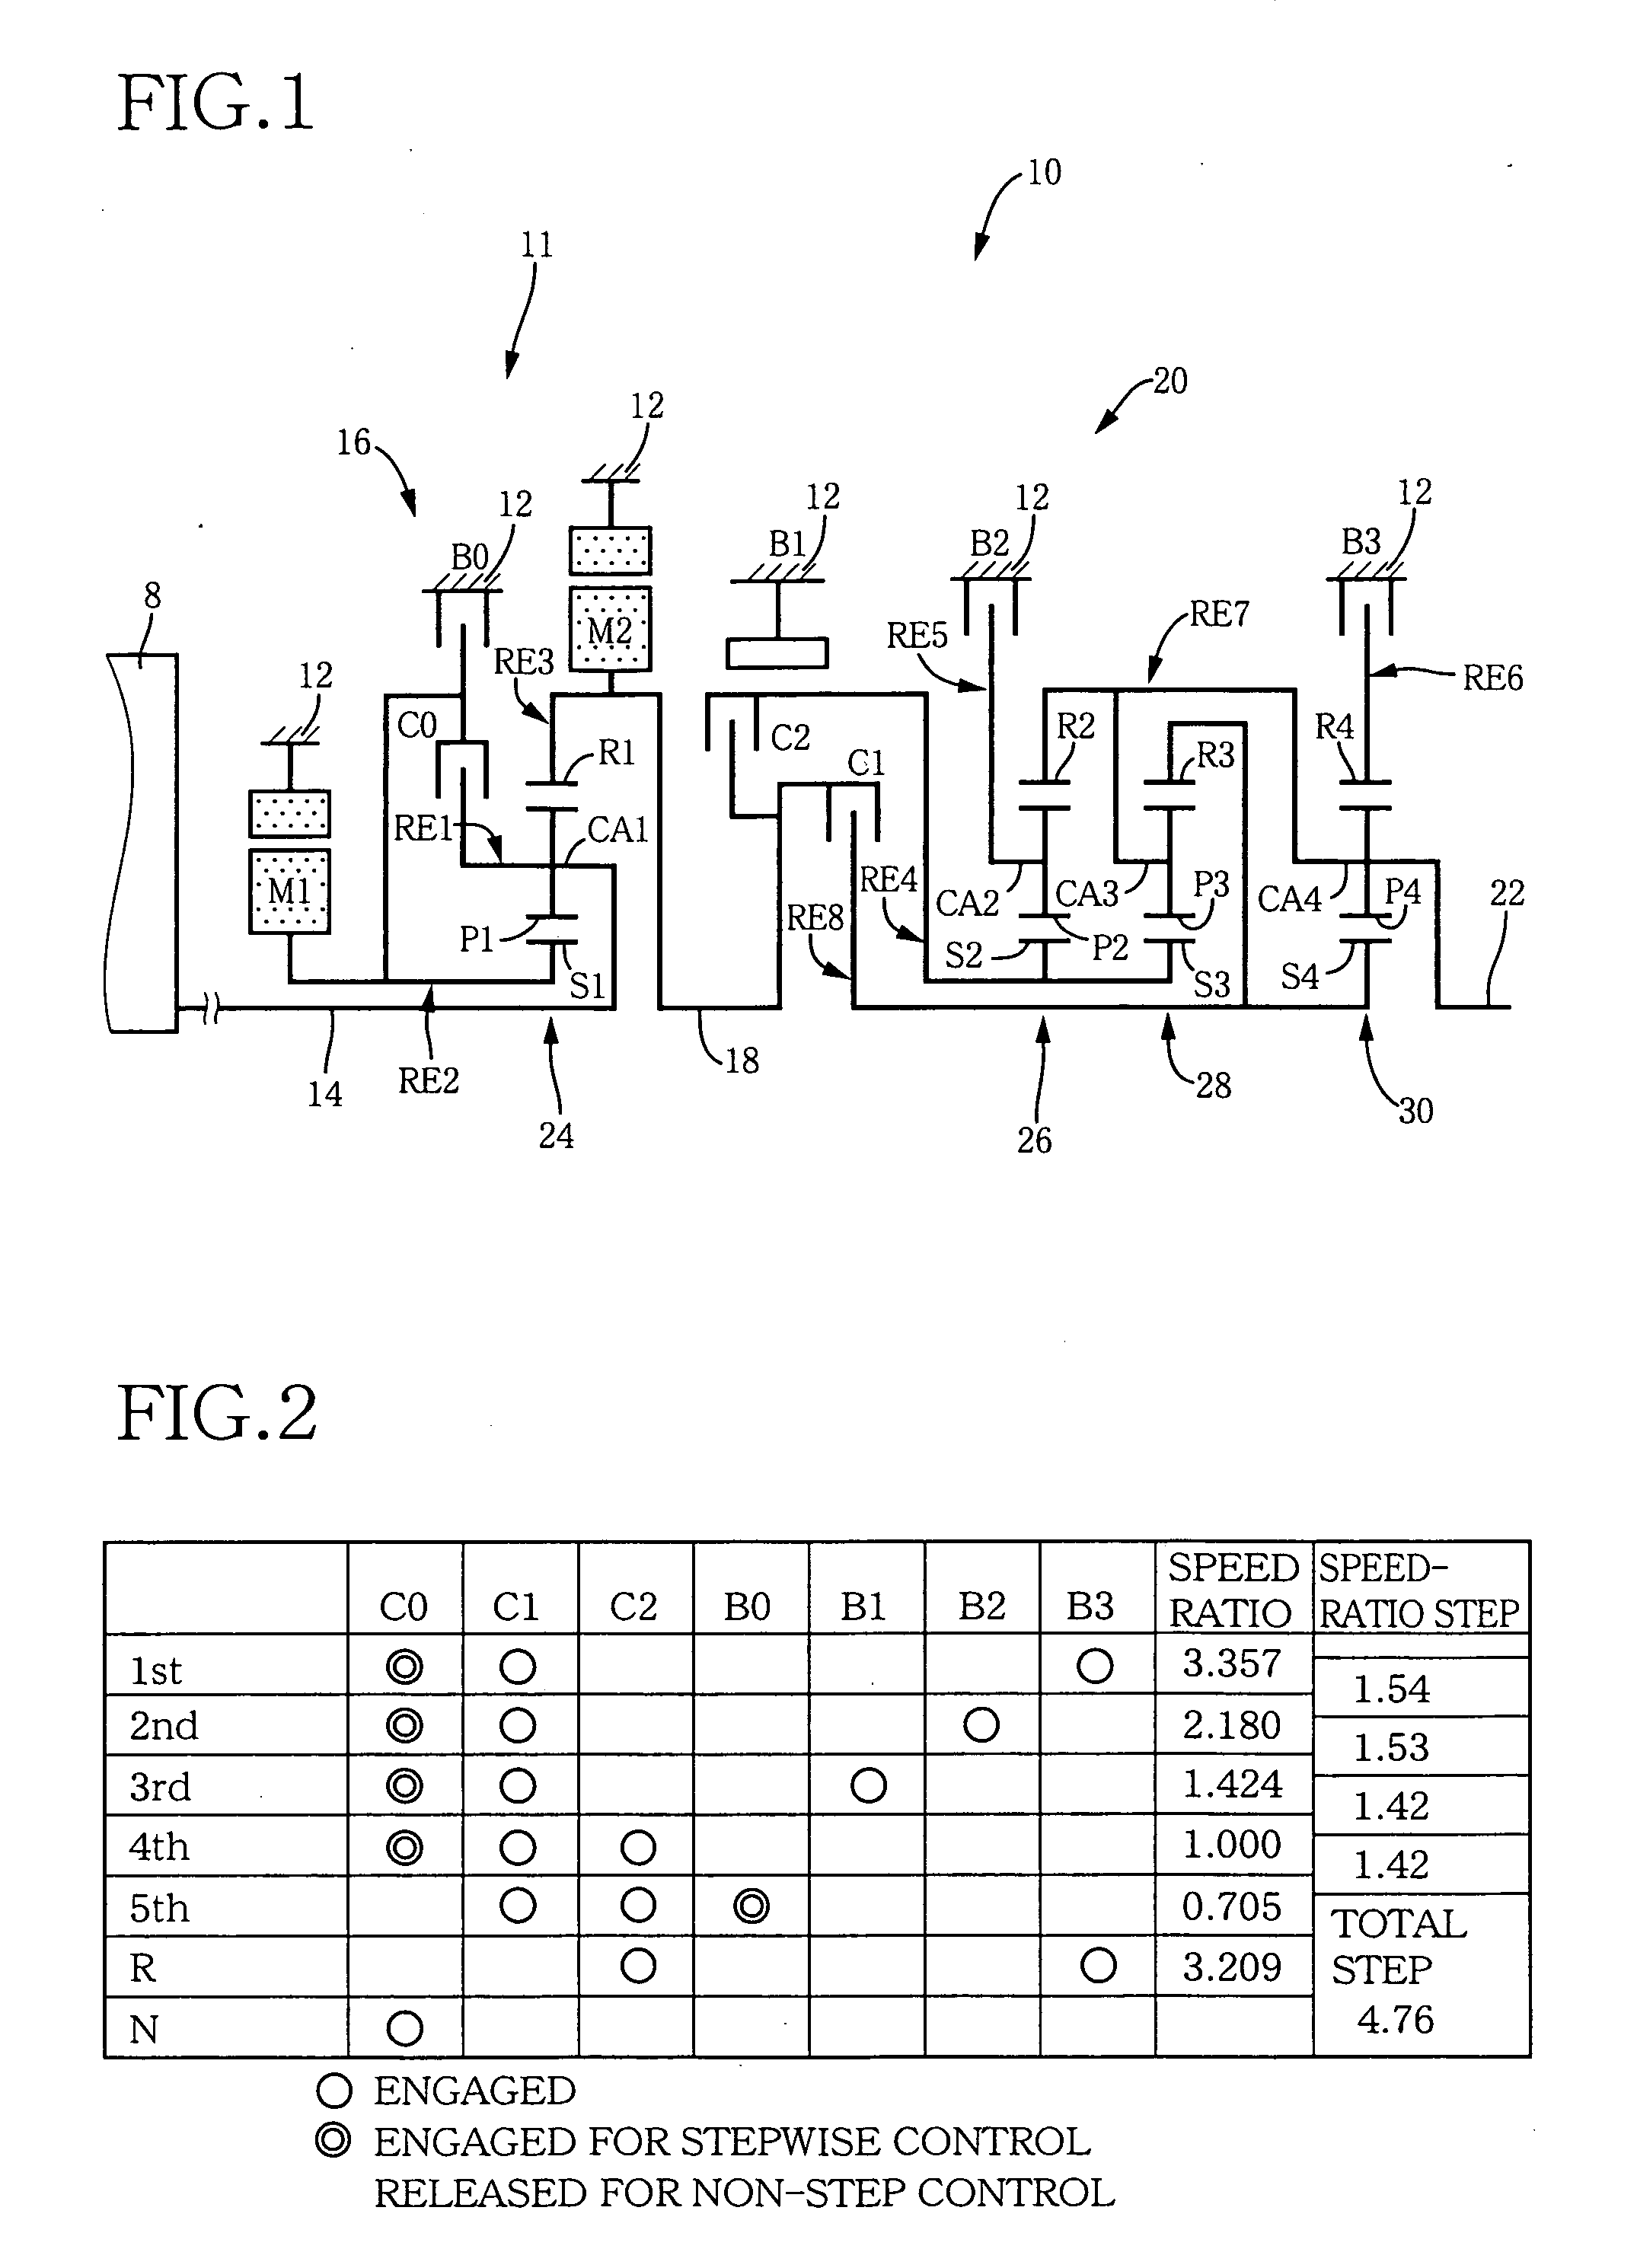 Control apparatus for use with driving device of vehicle